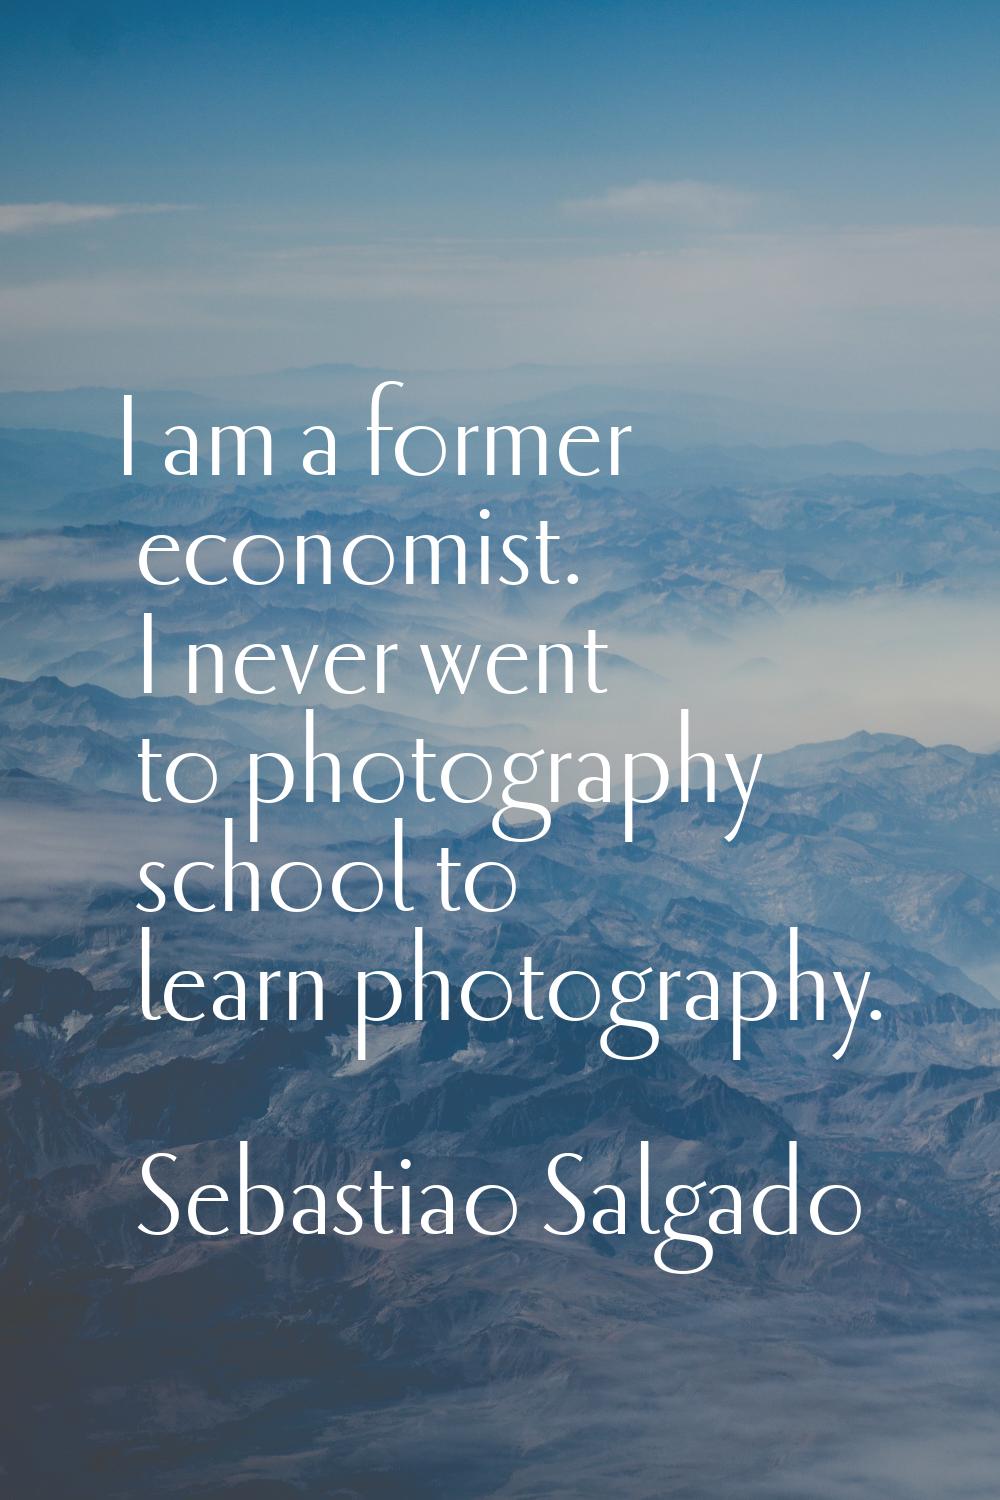 I am a former economist. I never went to photography school to learn photography.